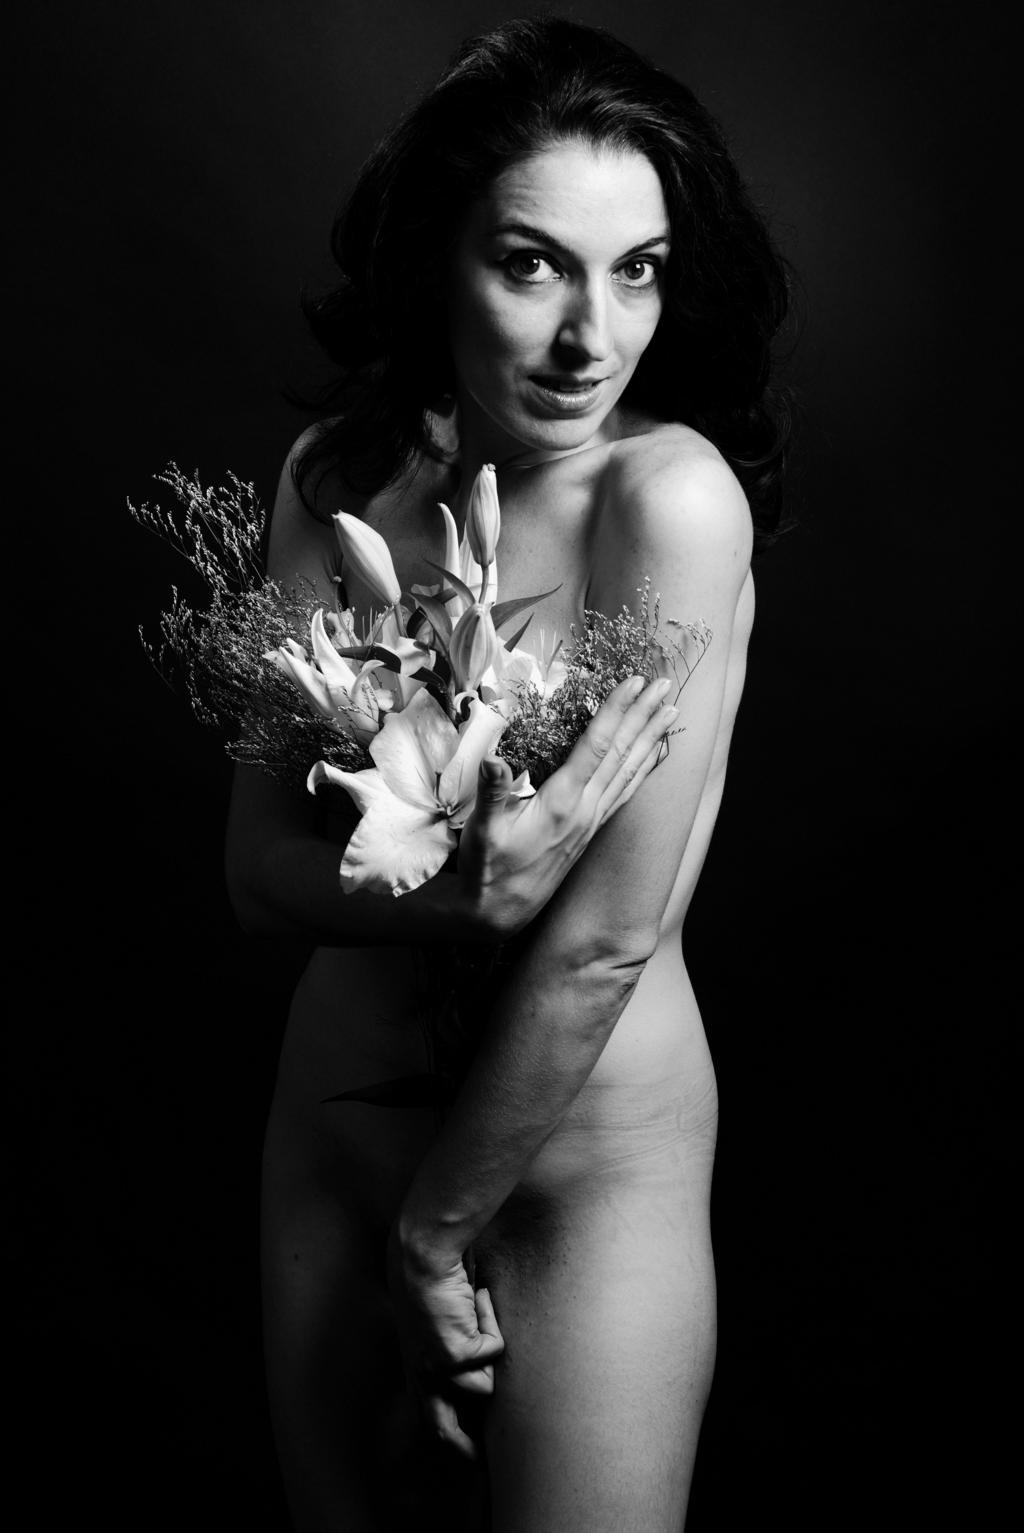 No Nude | 2020-12 | Lyric singer with flowers | giovannipasiniphoto.com